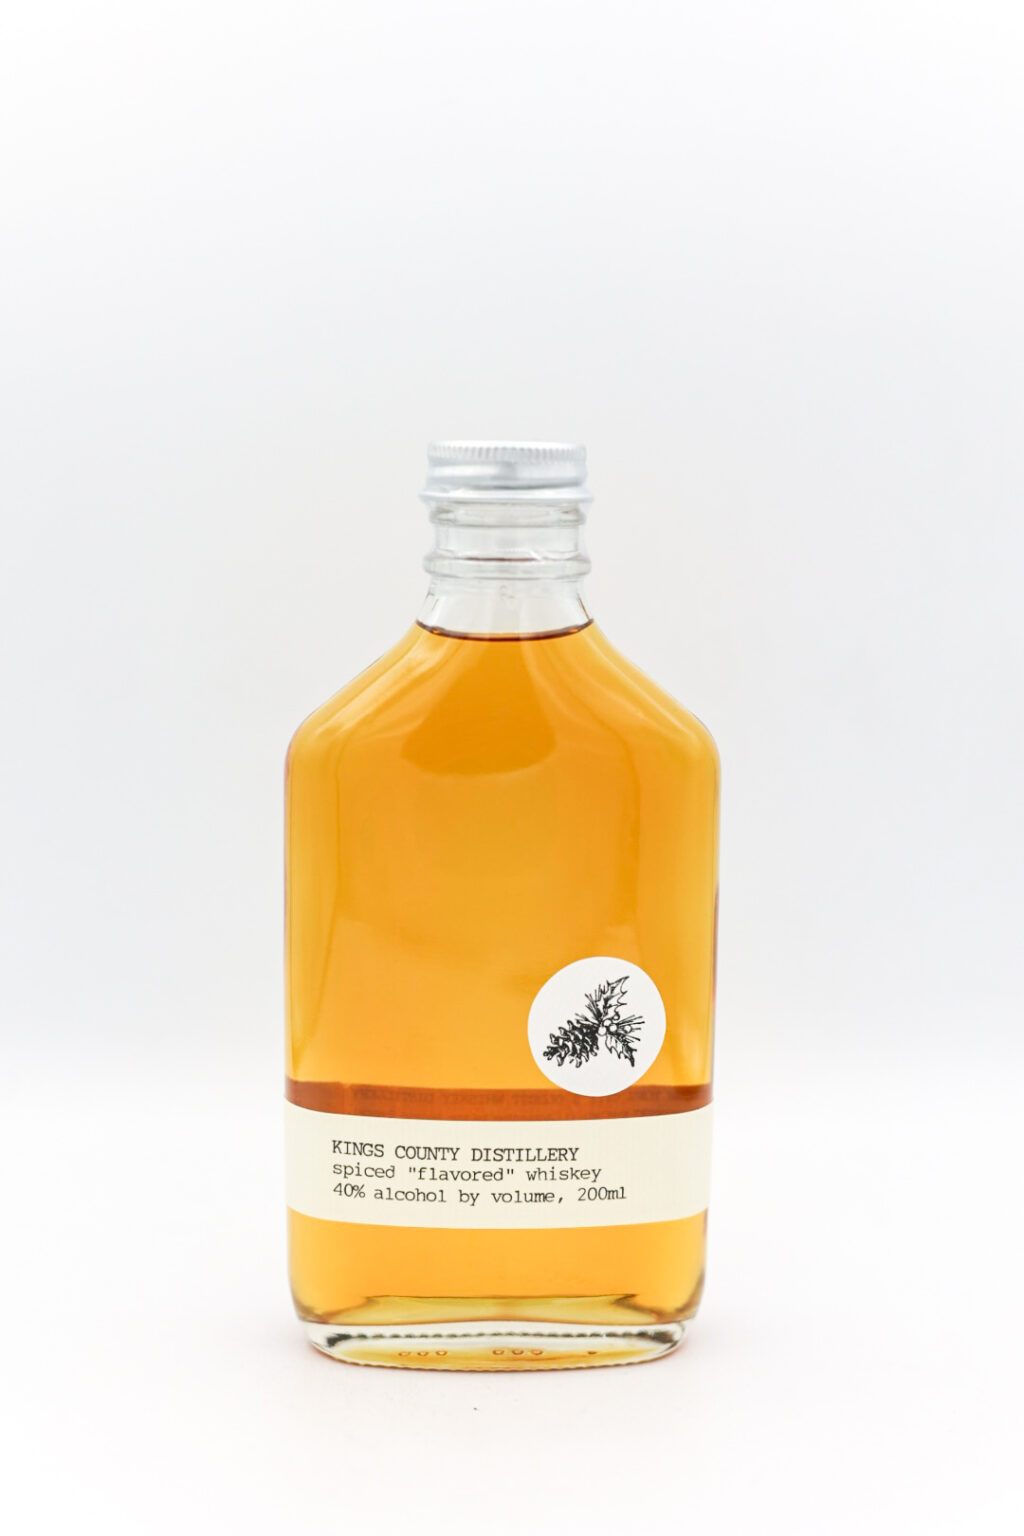 Kings County Distillery Spiced Whiskey 200ml